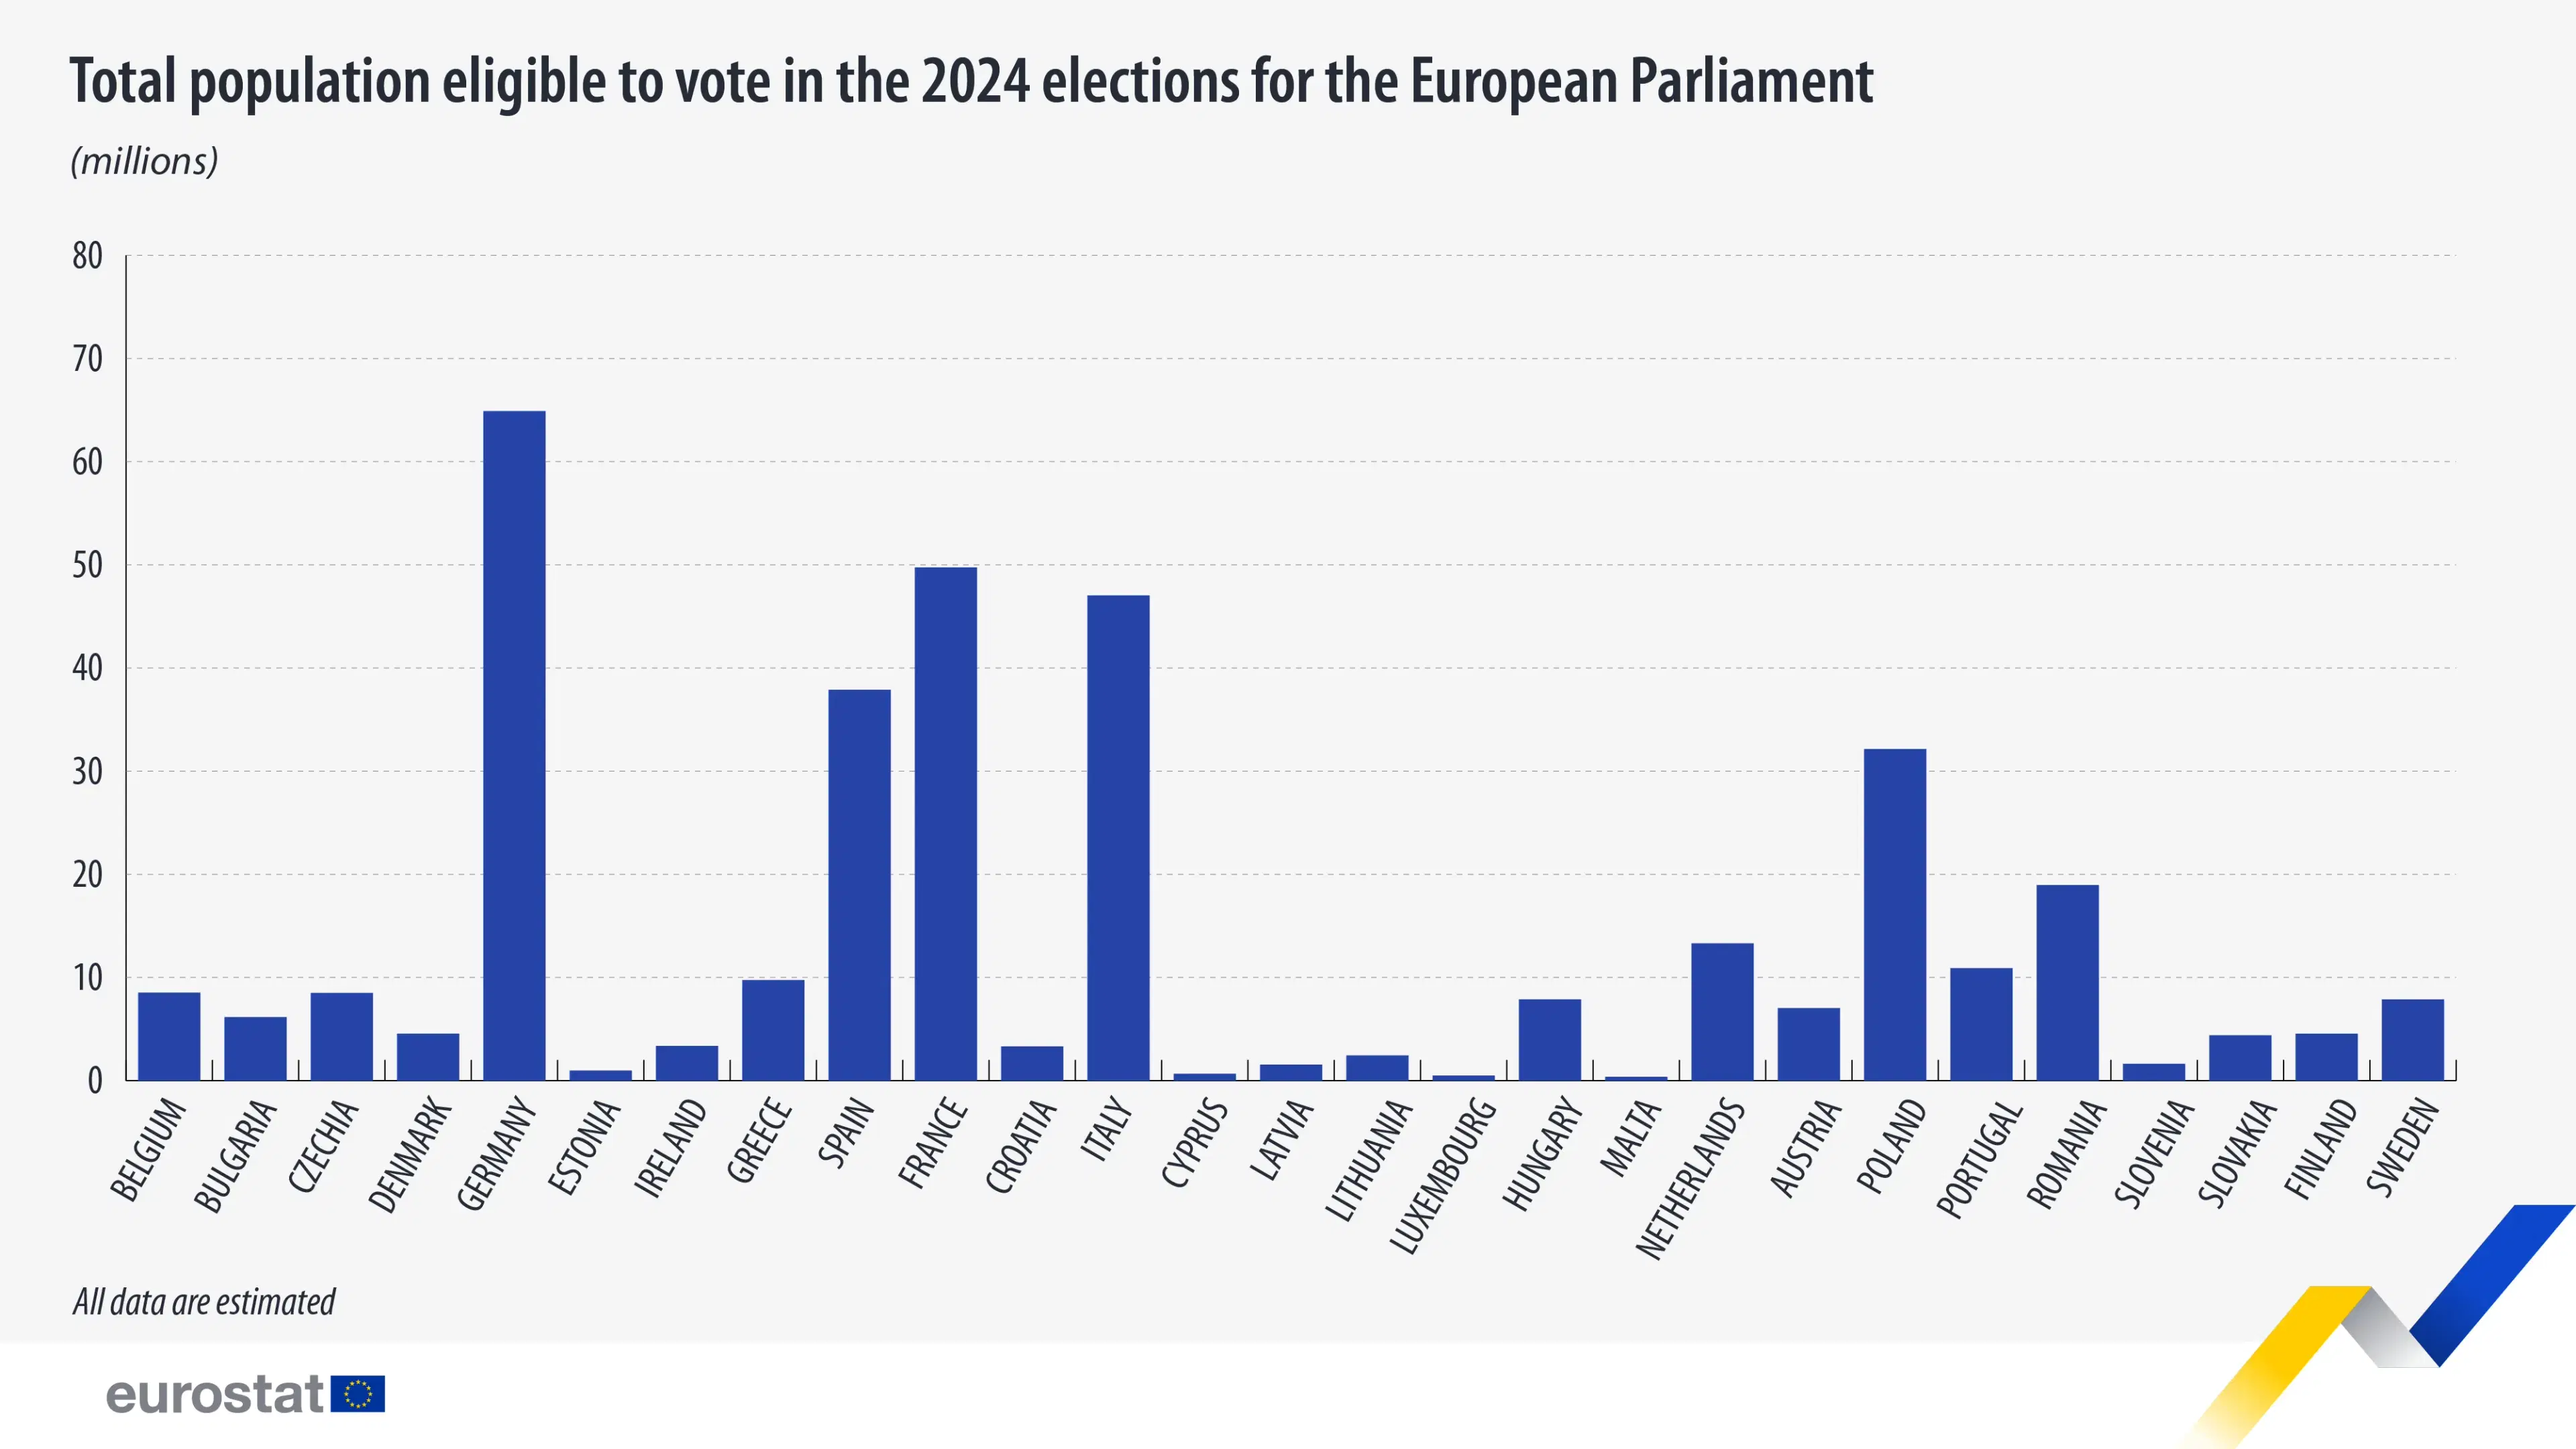 Eligible Voters in the 2024 European Parliament Elections, by Country